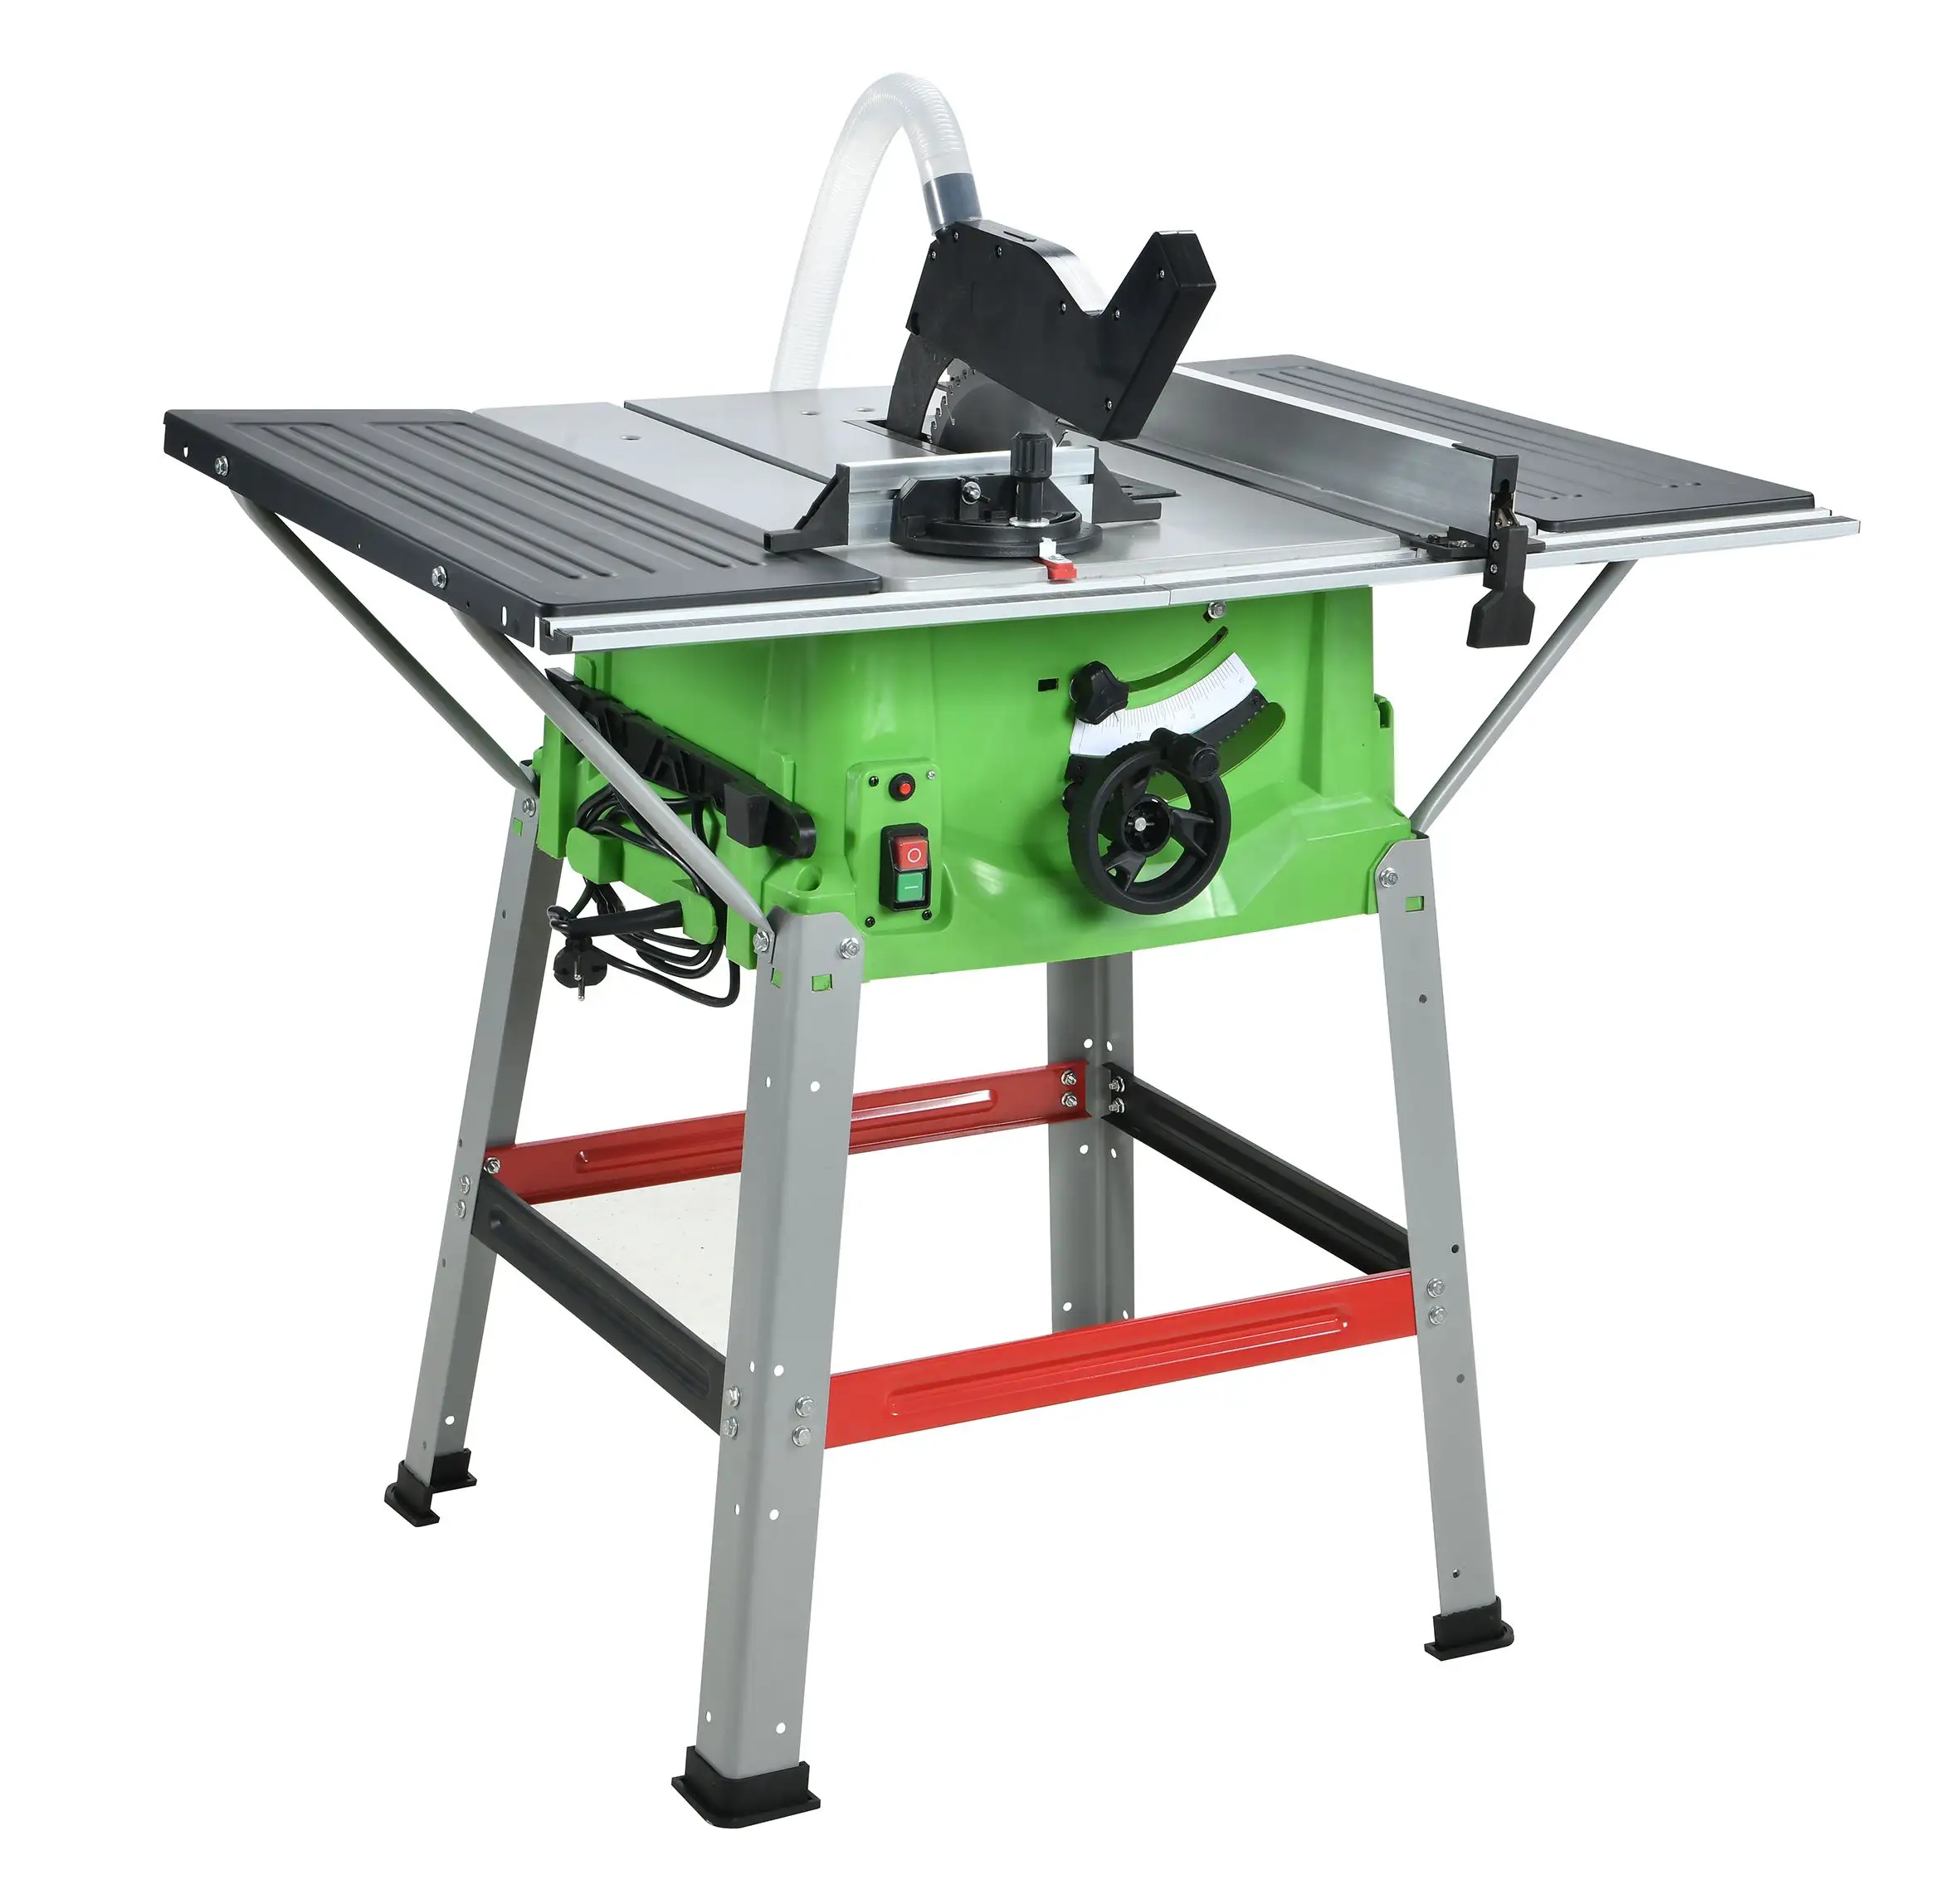 220-240v 255mm 10" 1800W Power Aluminum/Wood Cutting Machine Bench Top Industrial Electric Table Saw